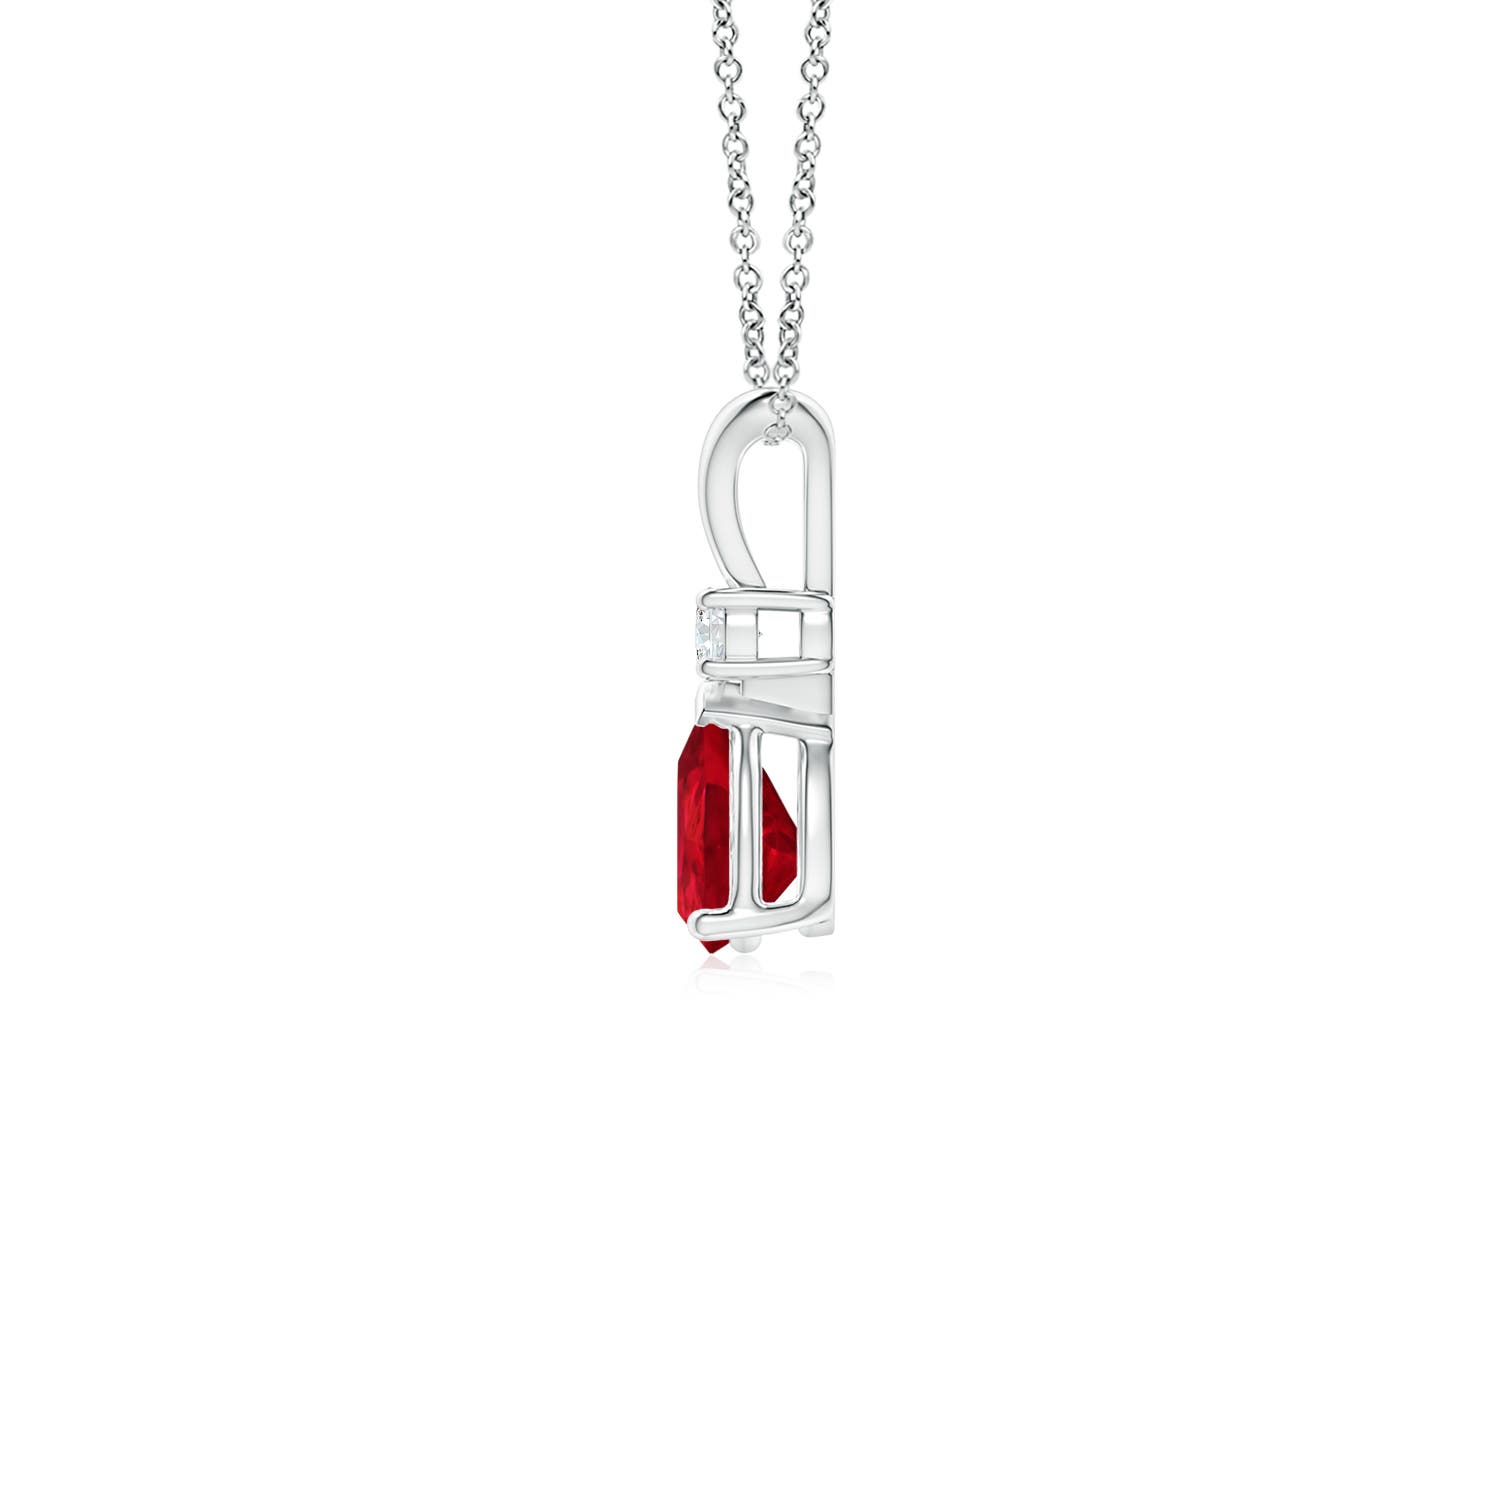 Shop Ruby Pendant Necklaces for Women | Angara